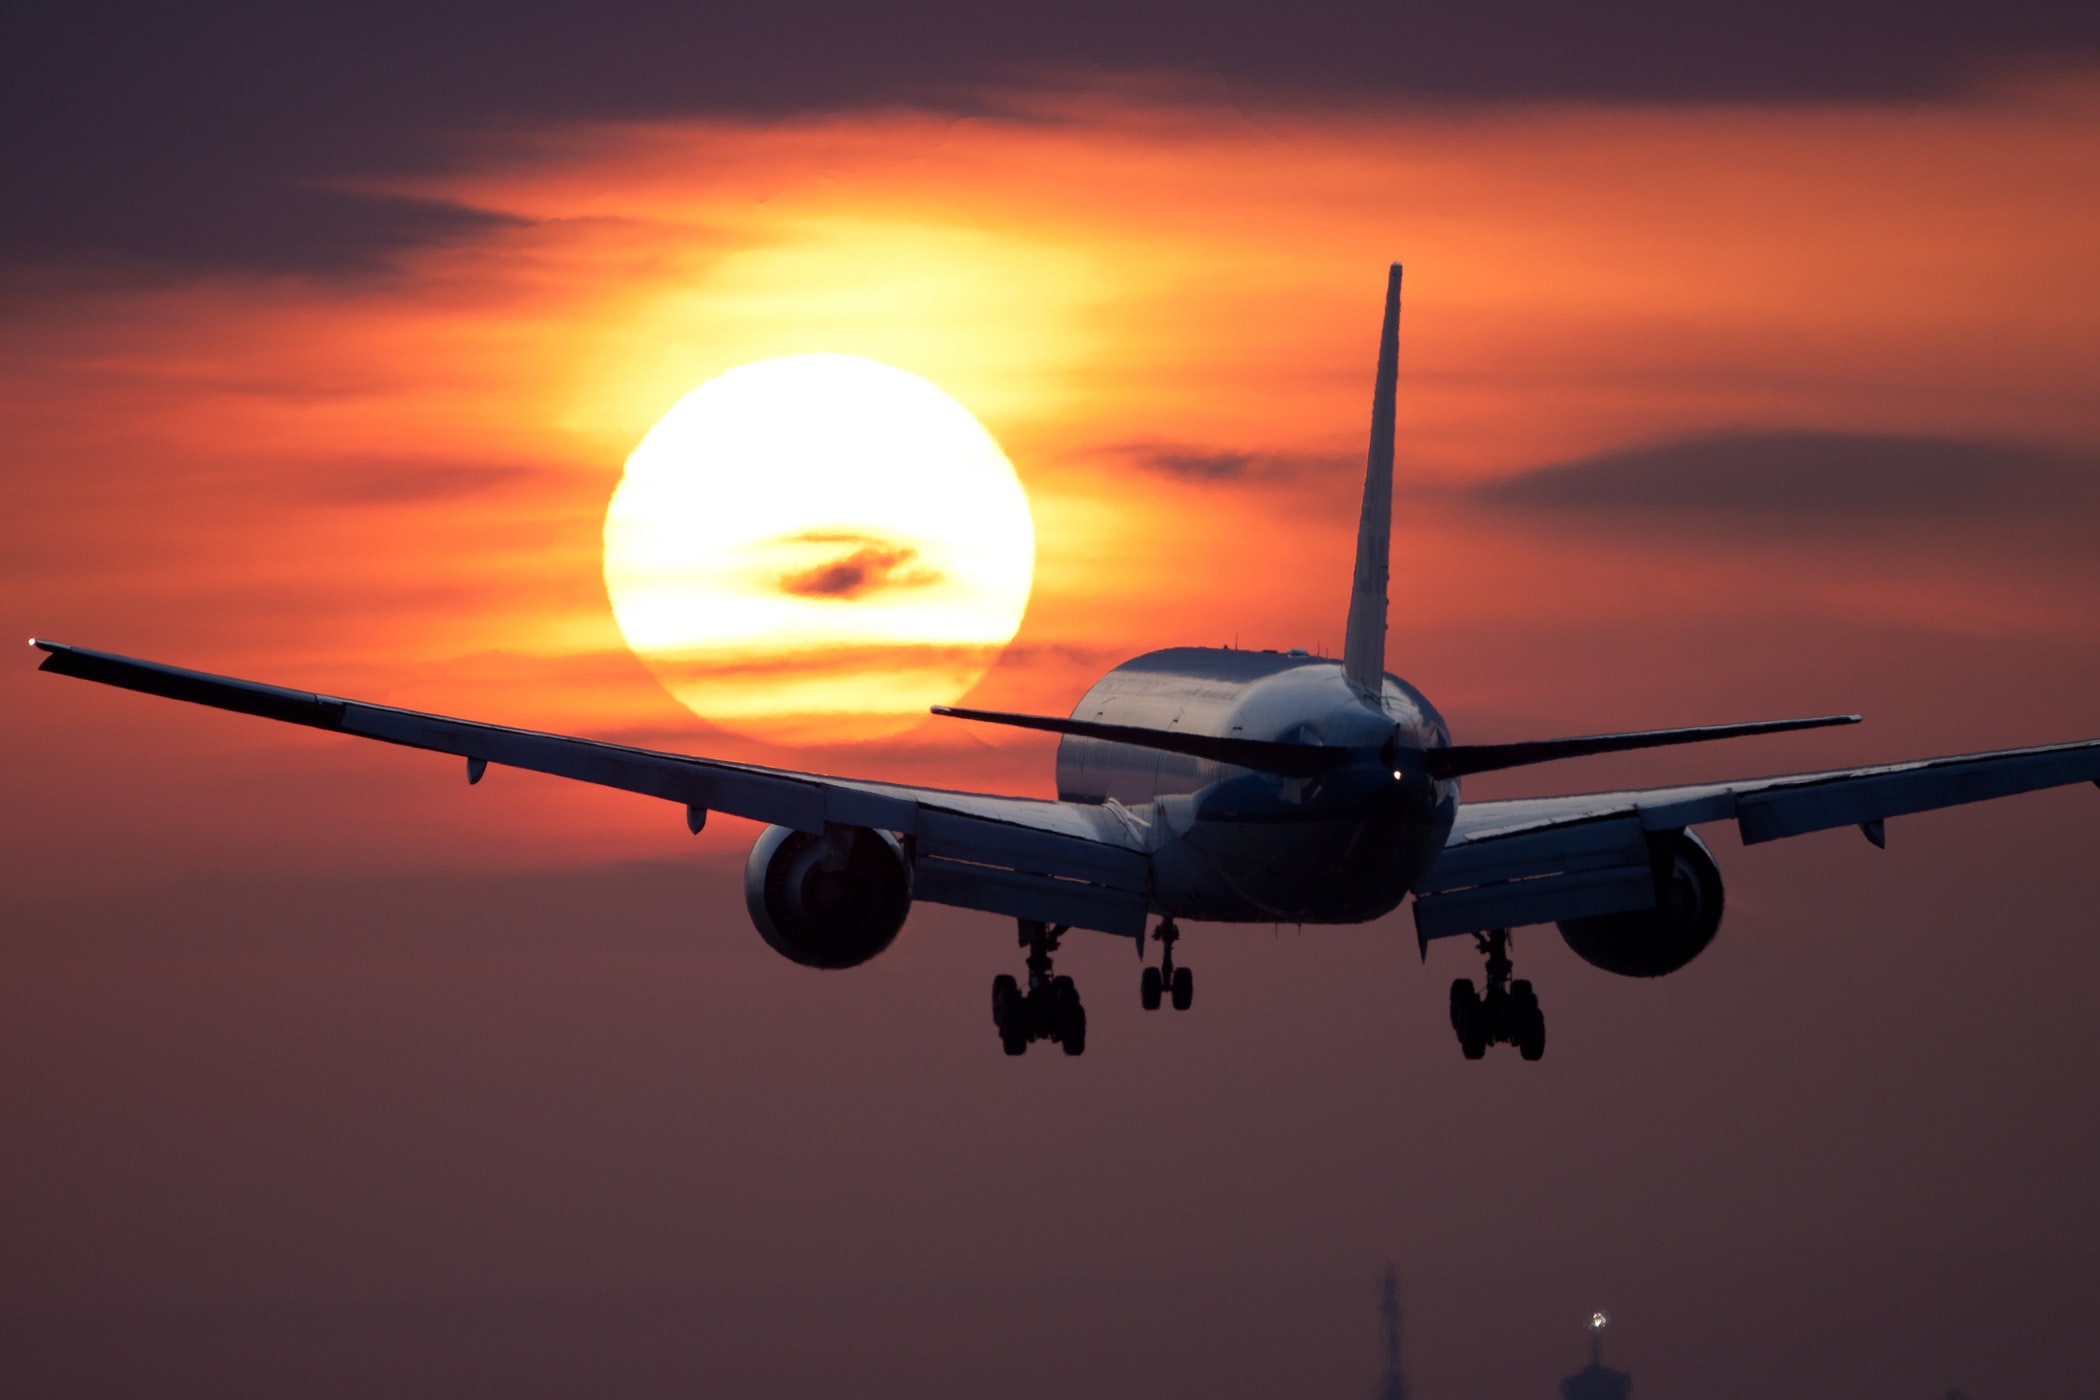 What to expect from Sustainable Aviation Fuel